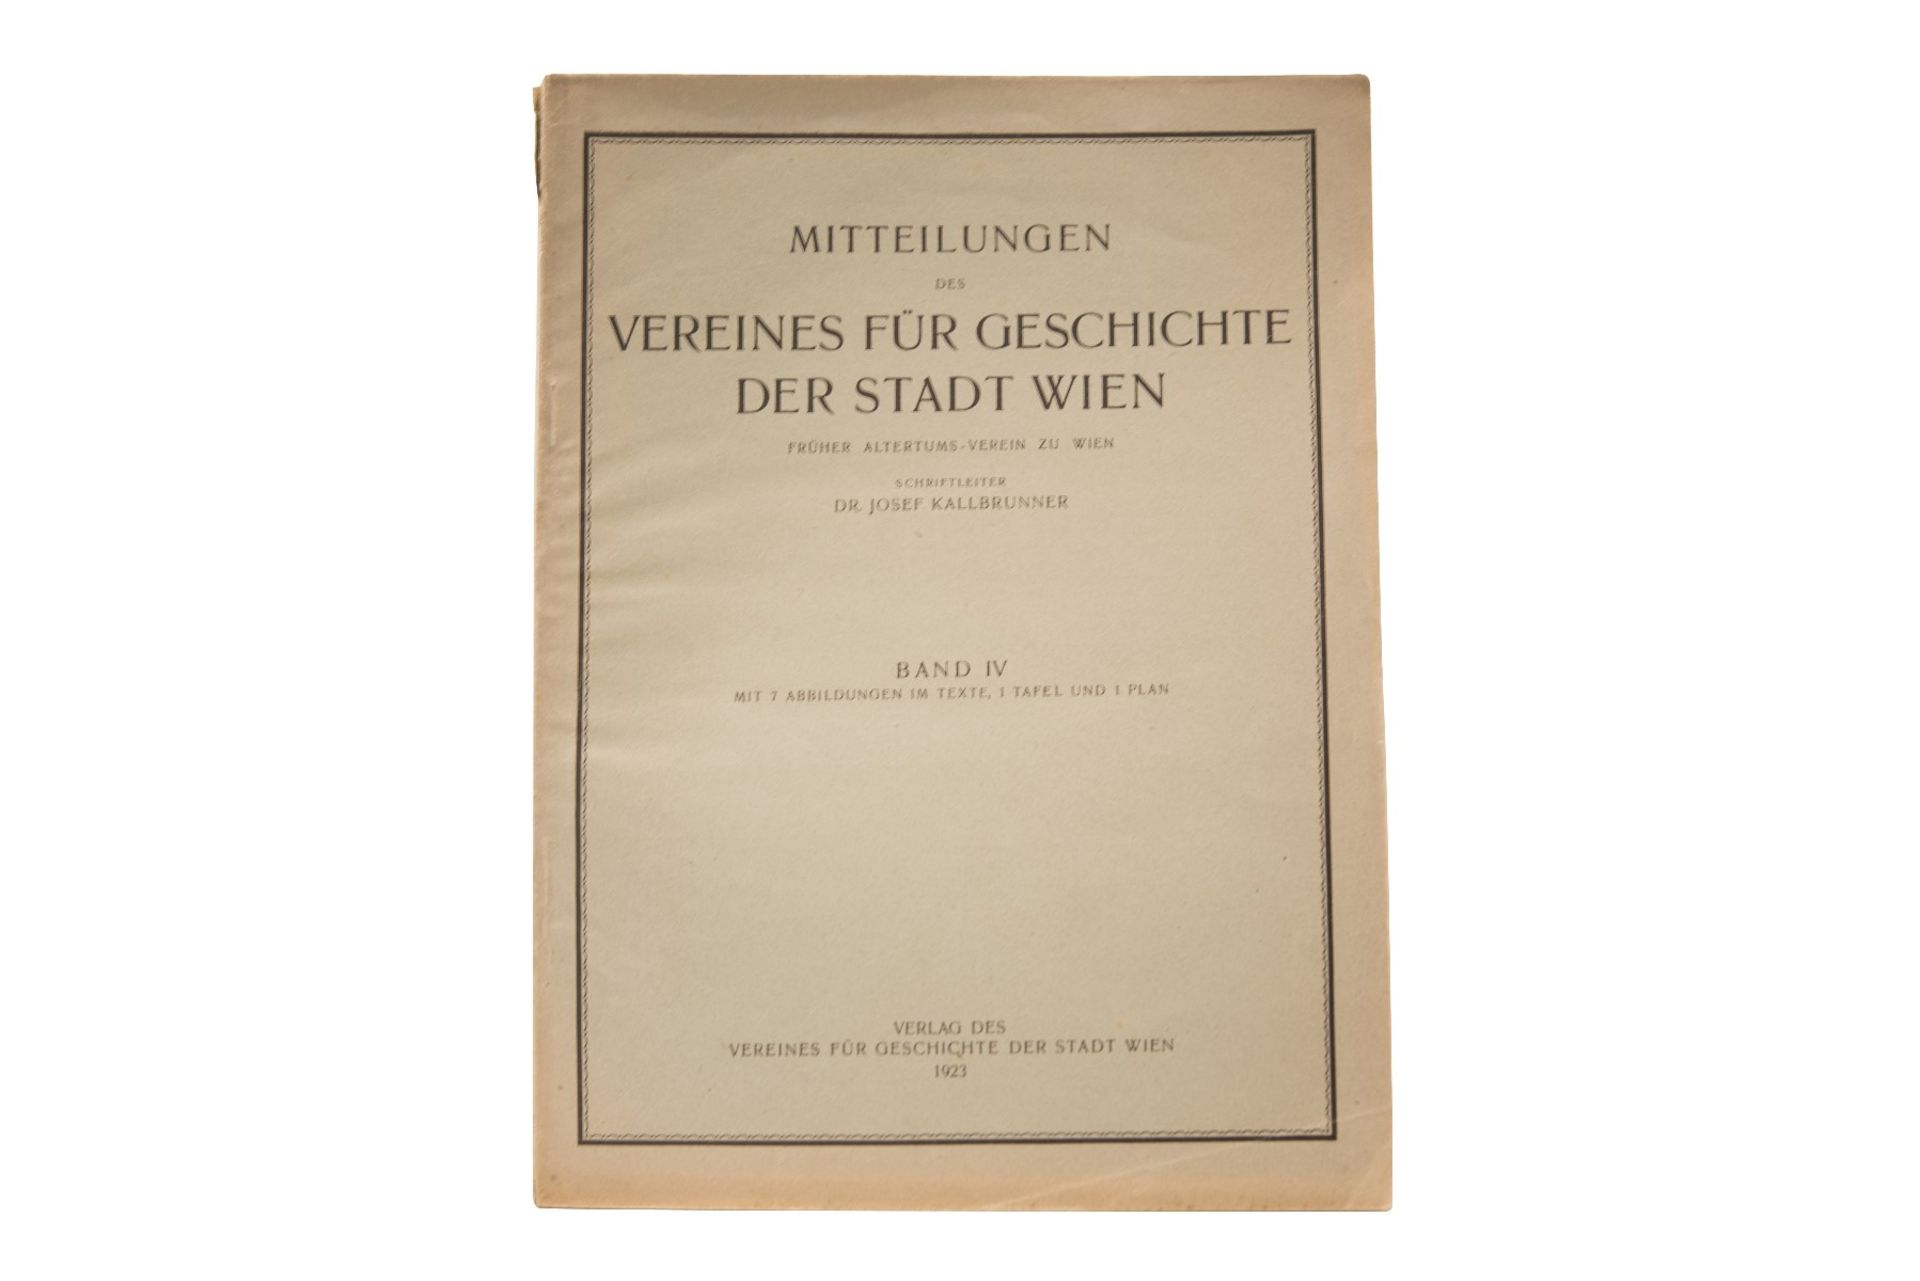 Communication of the Association for the History of Vienna around 1923